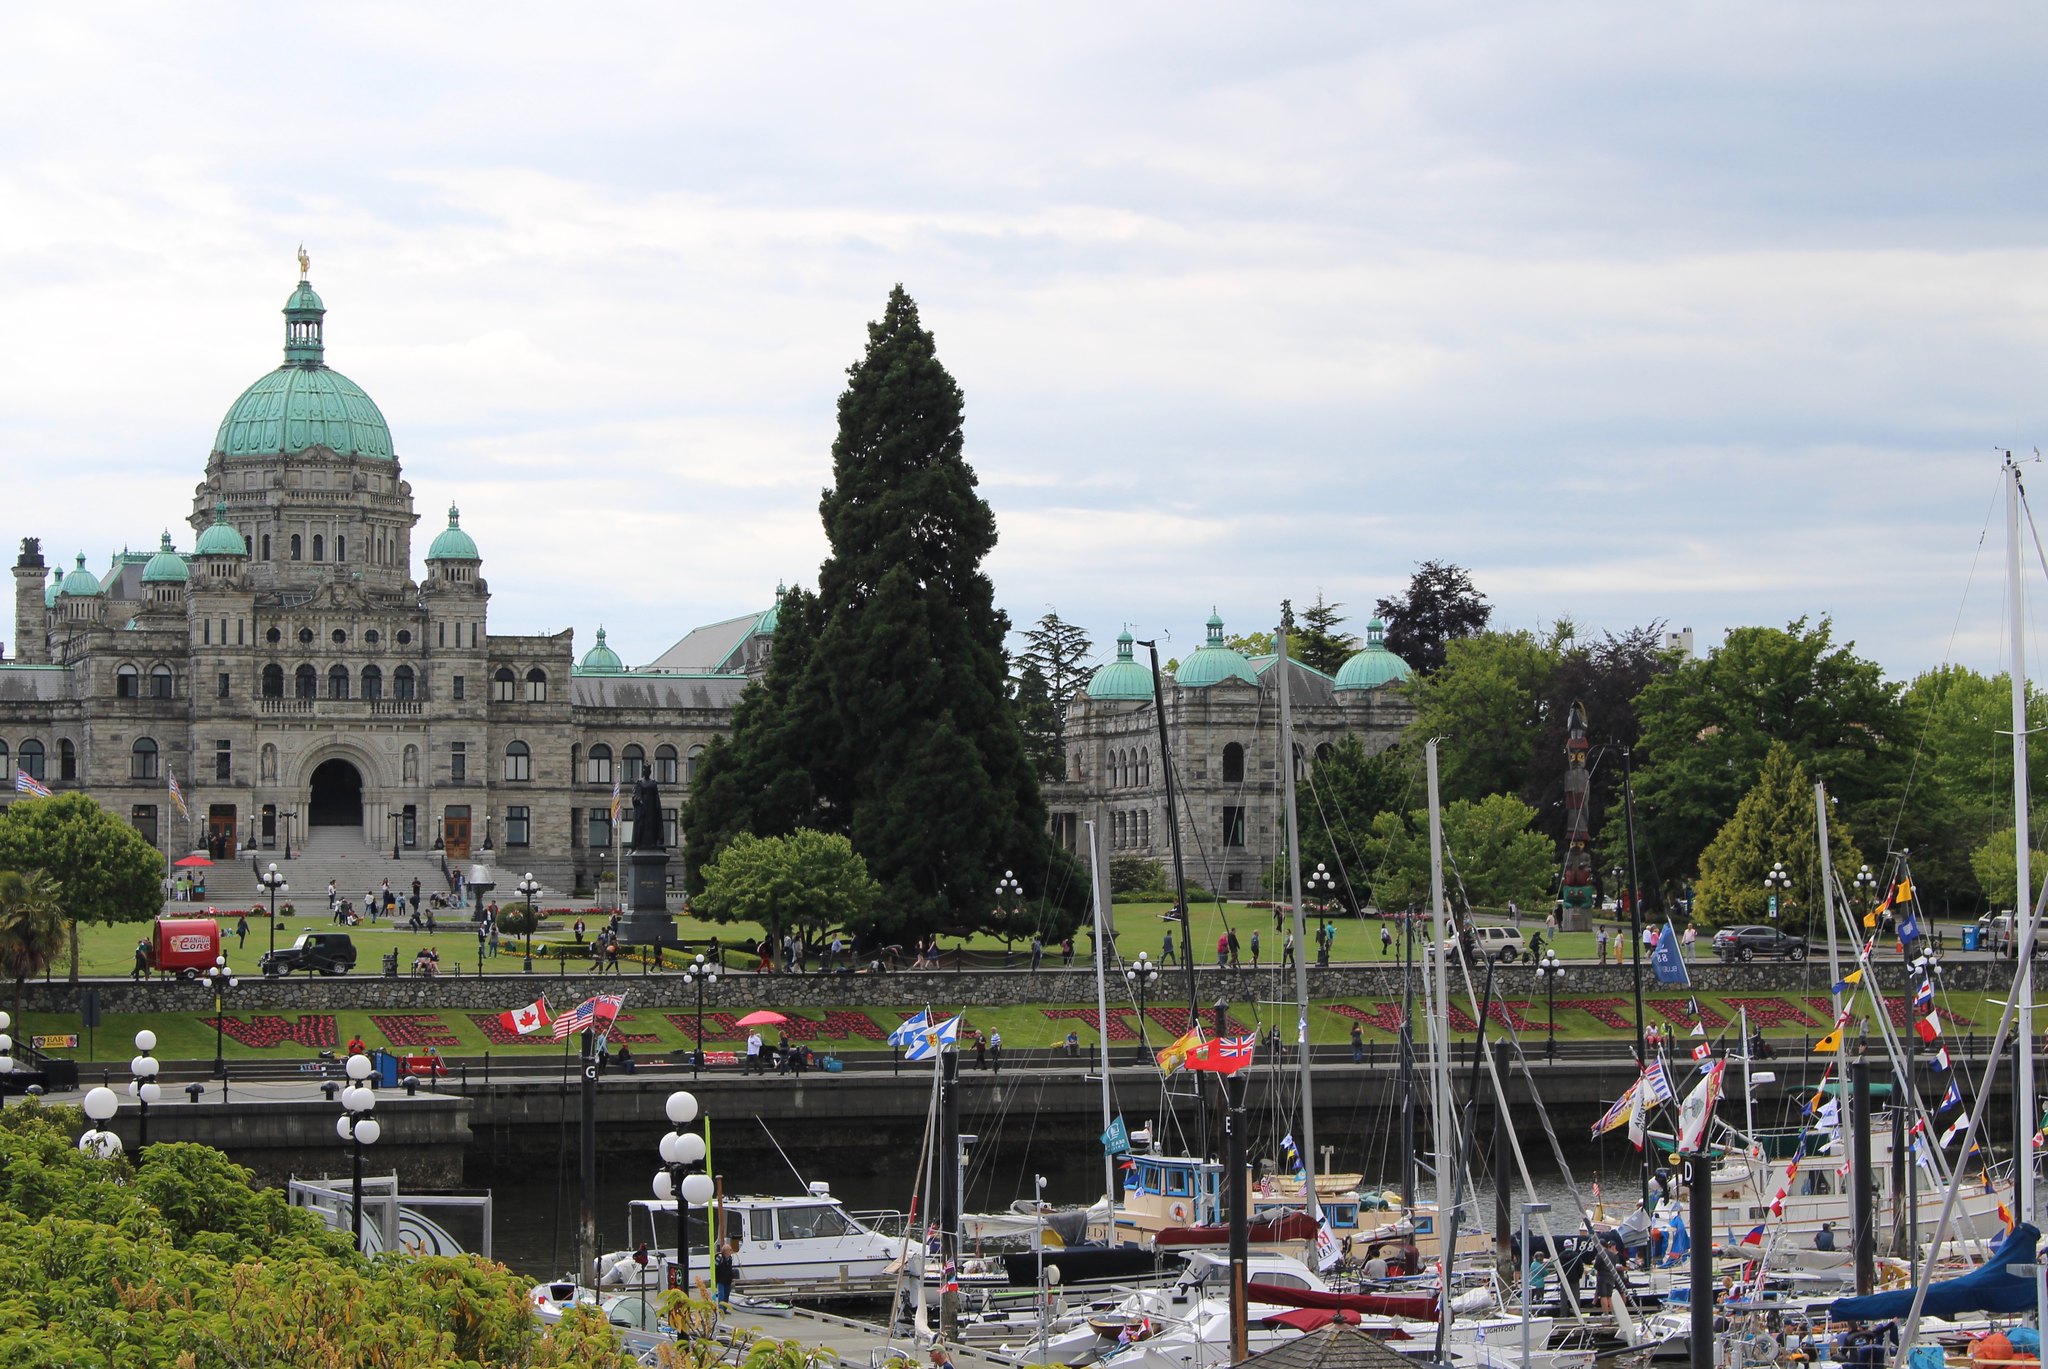 Inner Harbour Victoria Image Credit Aza Mather on Flickr